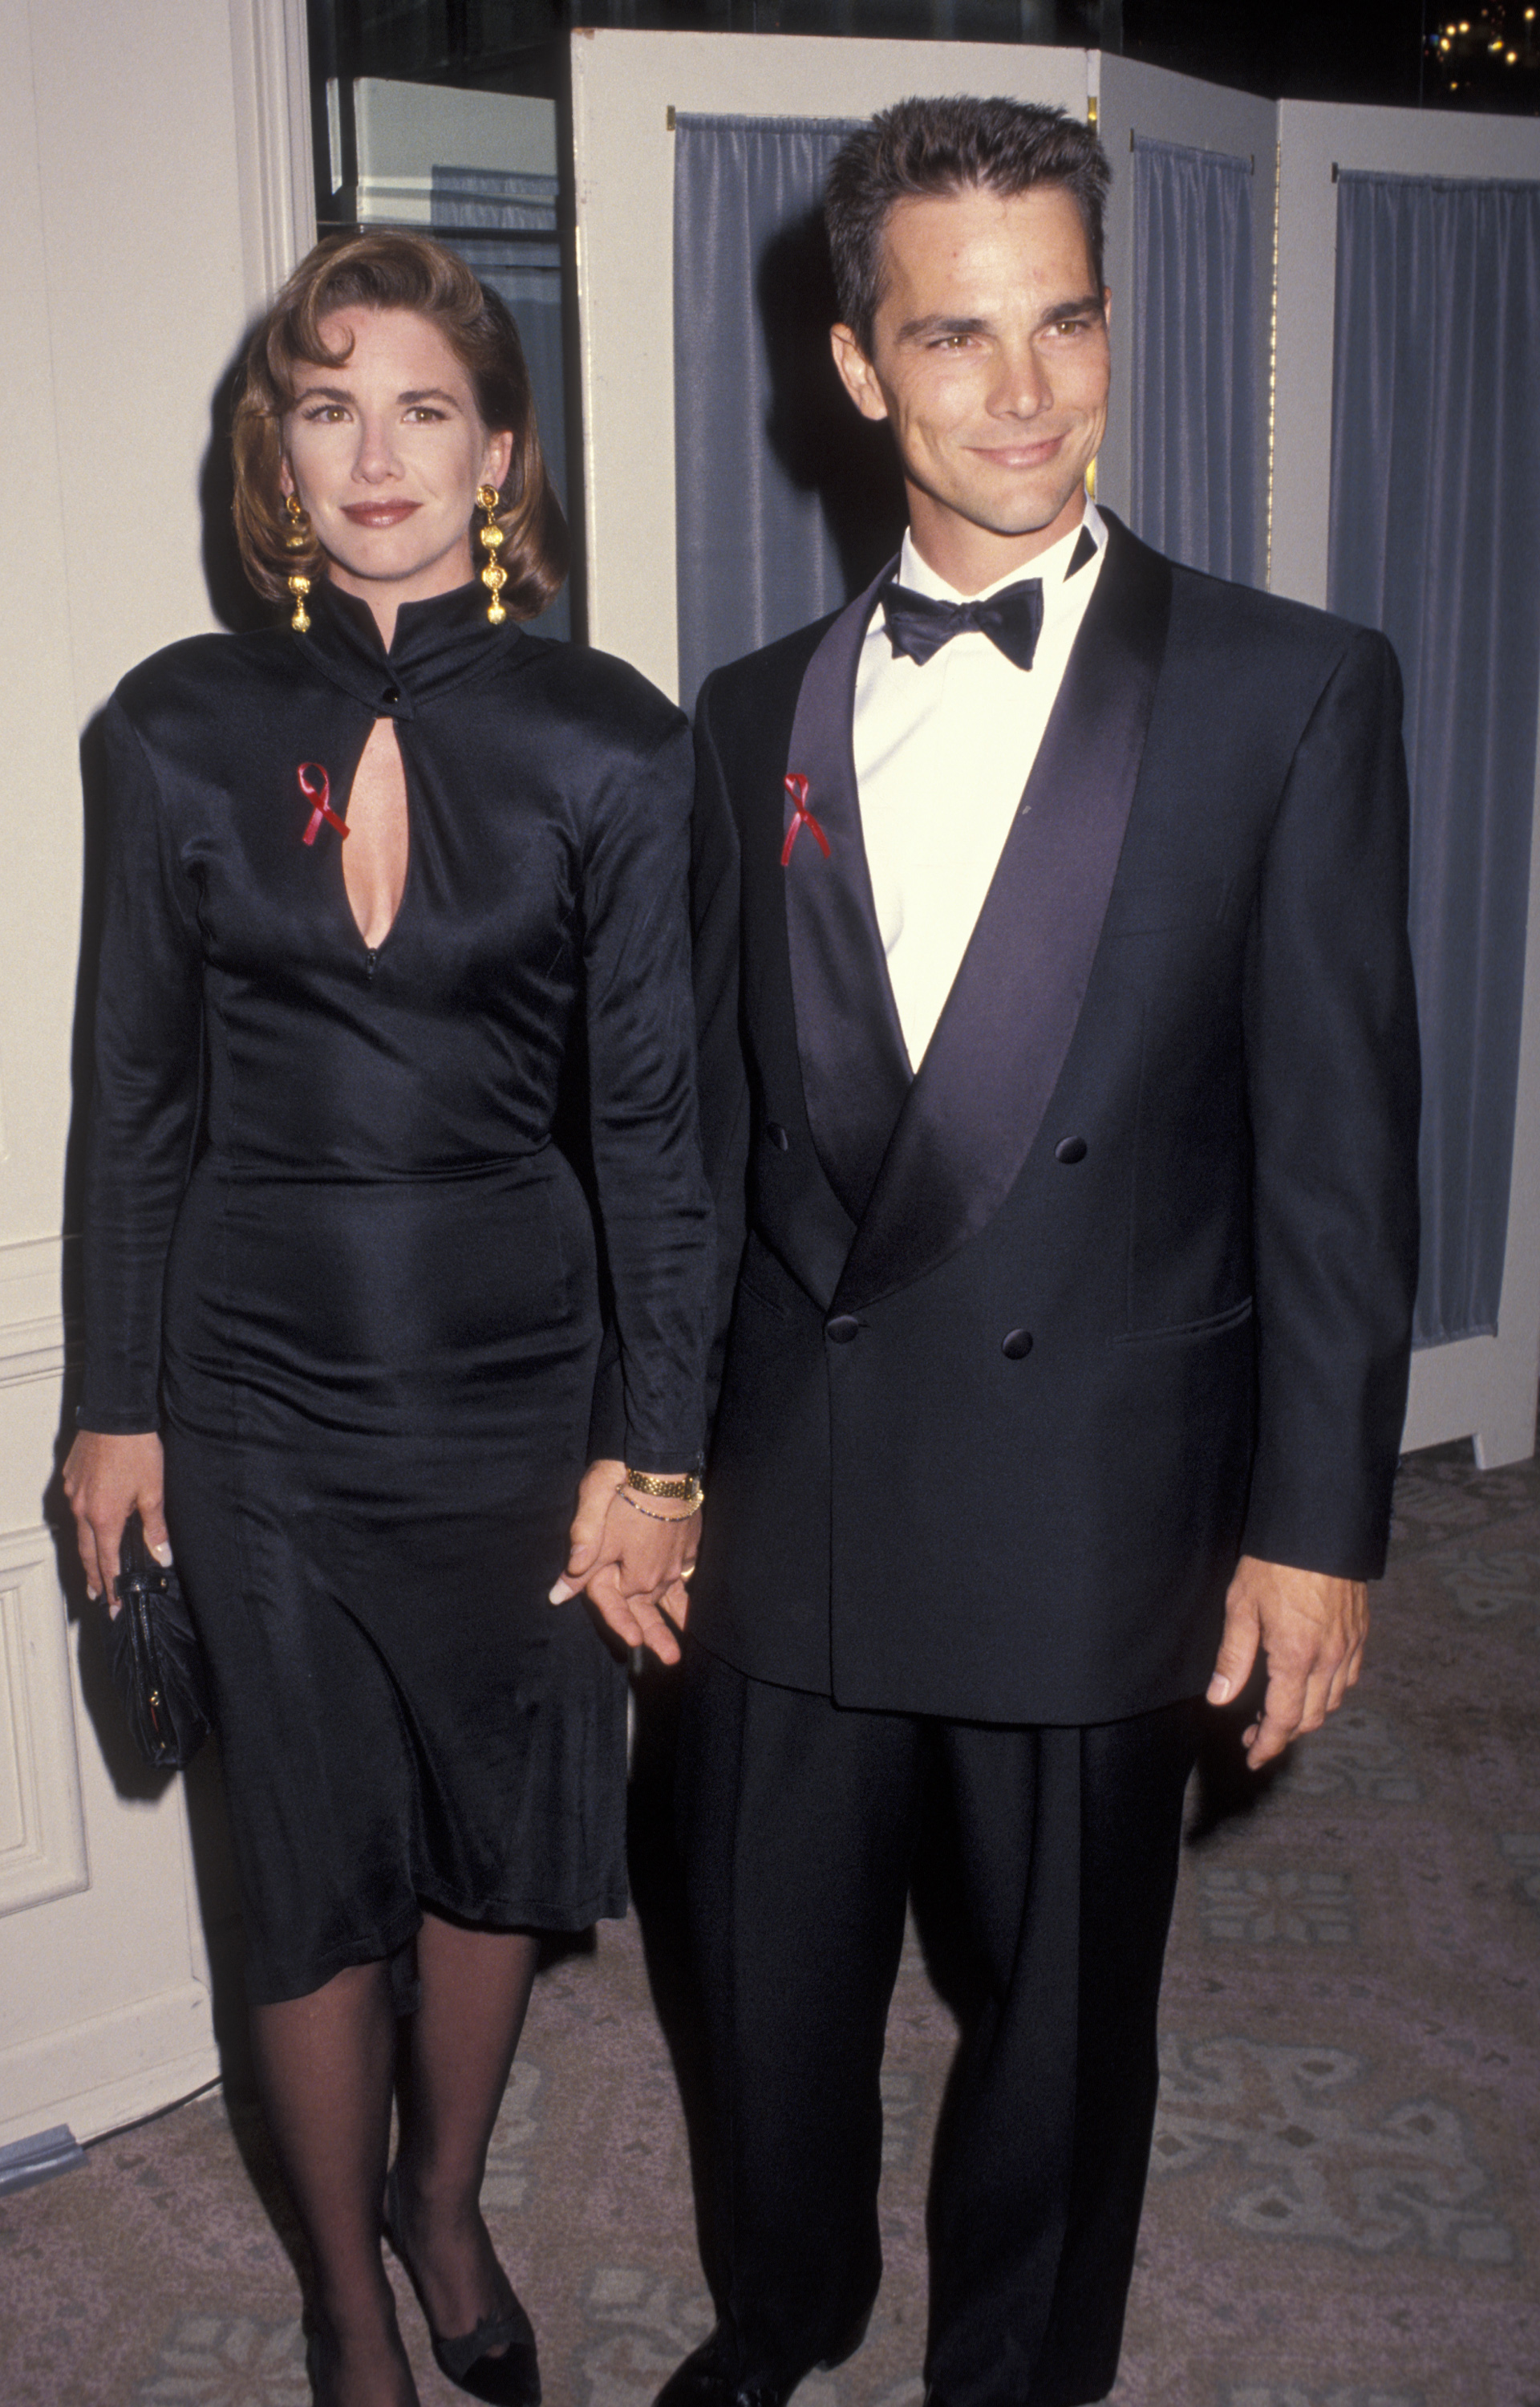 Melissa Gilbert and her first husband, Bo Brinkman at the 22nd Annual Nostros Awards | Source: Getty Images